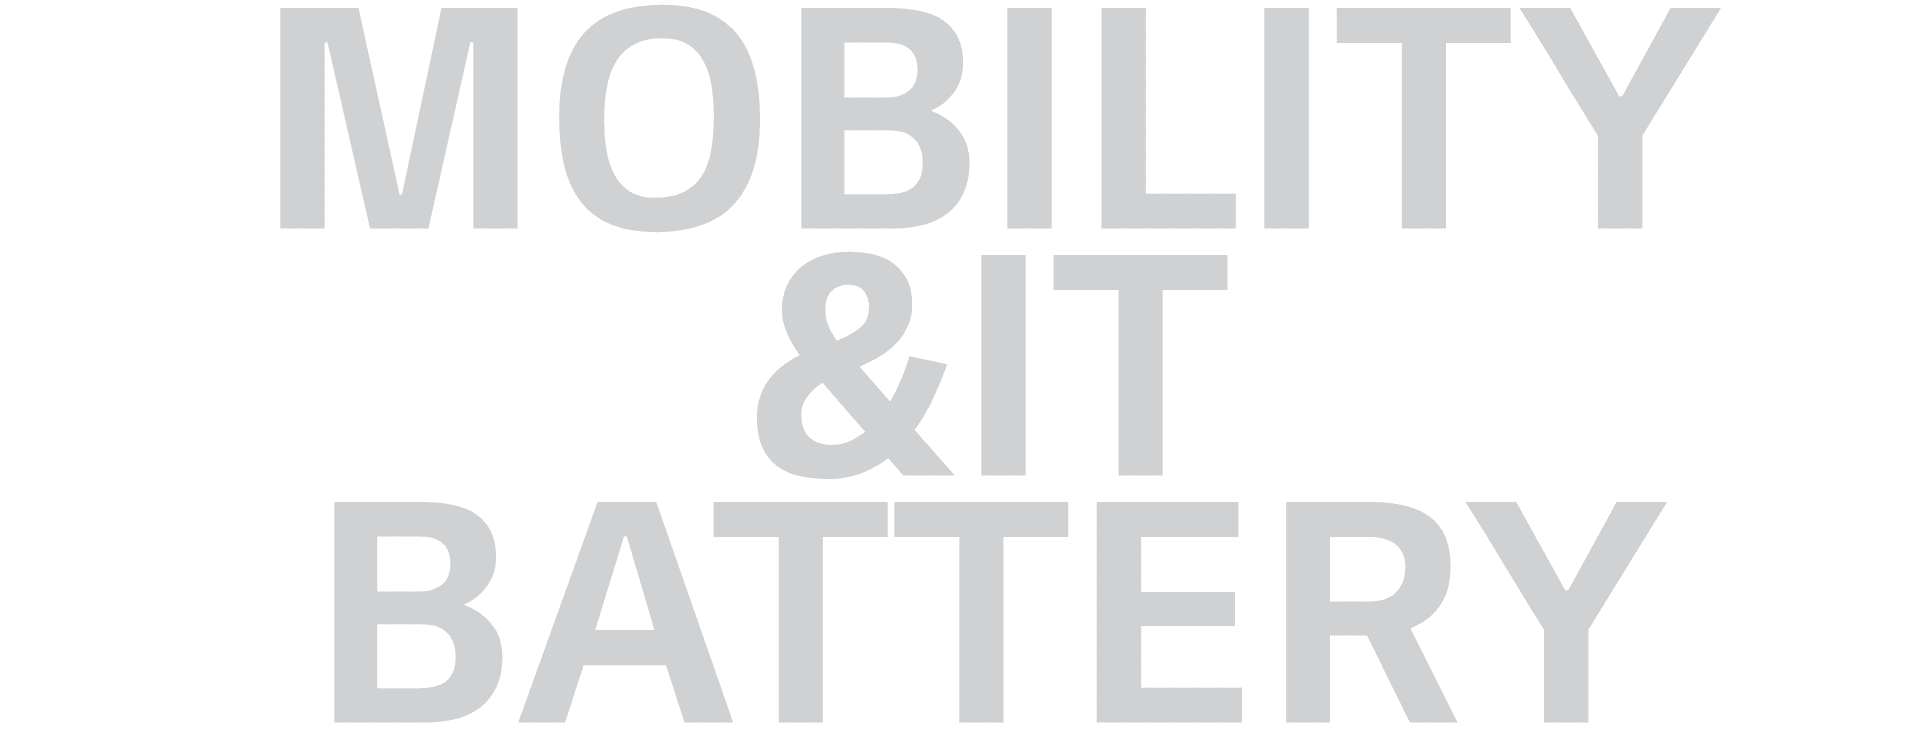 MOBILITY & IT BATTERY